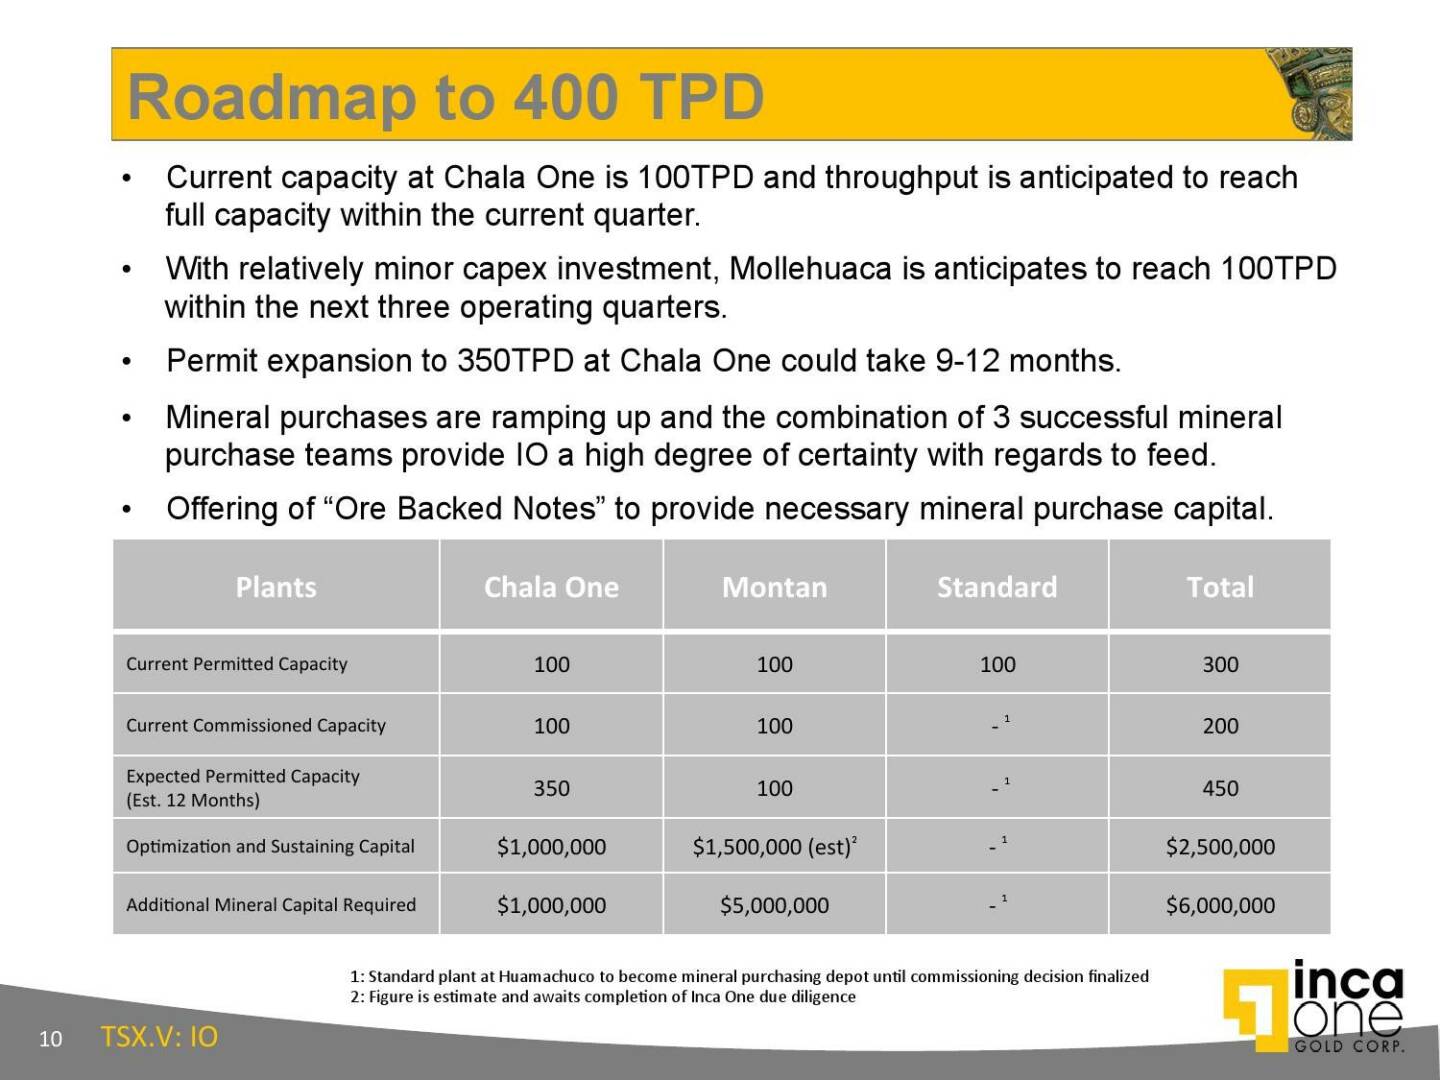 Roadmap to 400 TPD